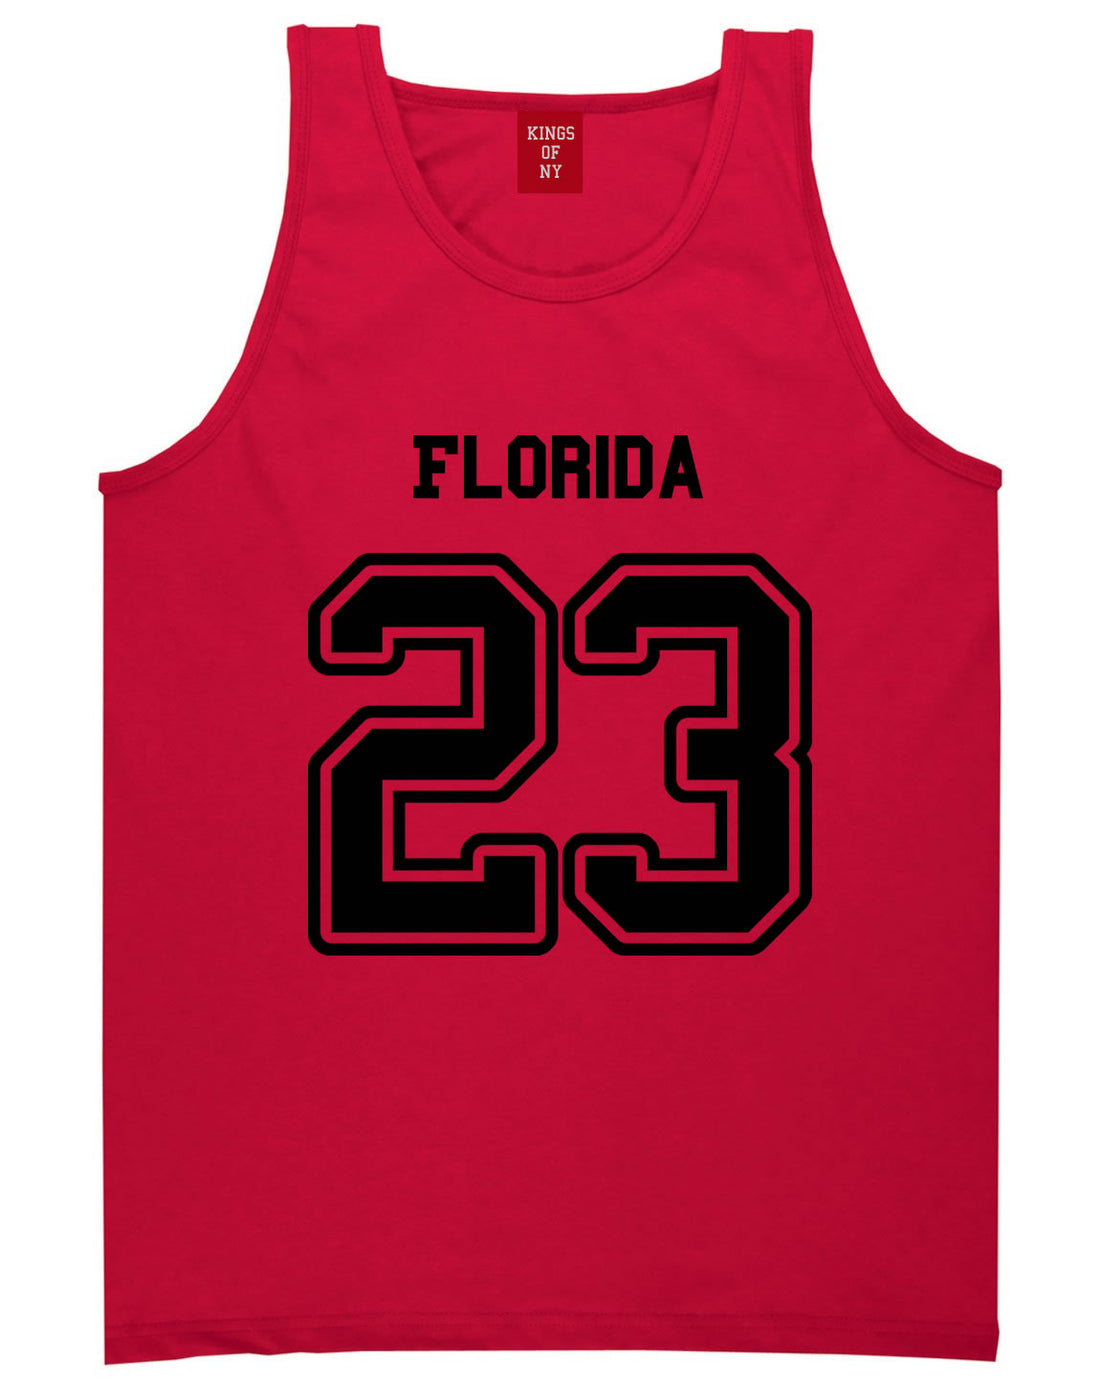 Sport Style Florida 23 Team State Jersey Mens Tank Top By Kings Of NY